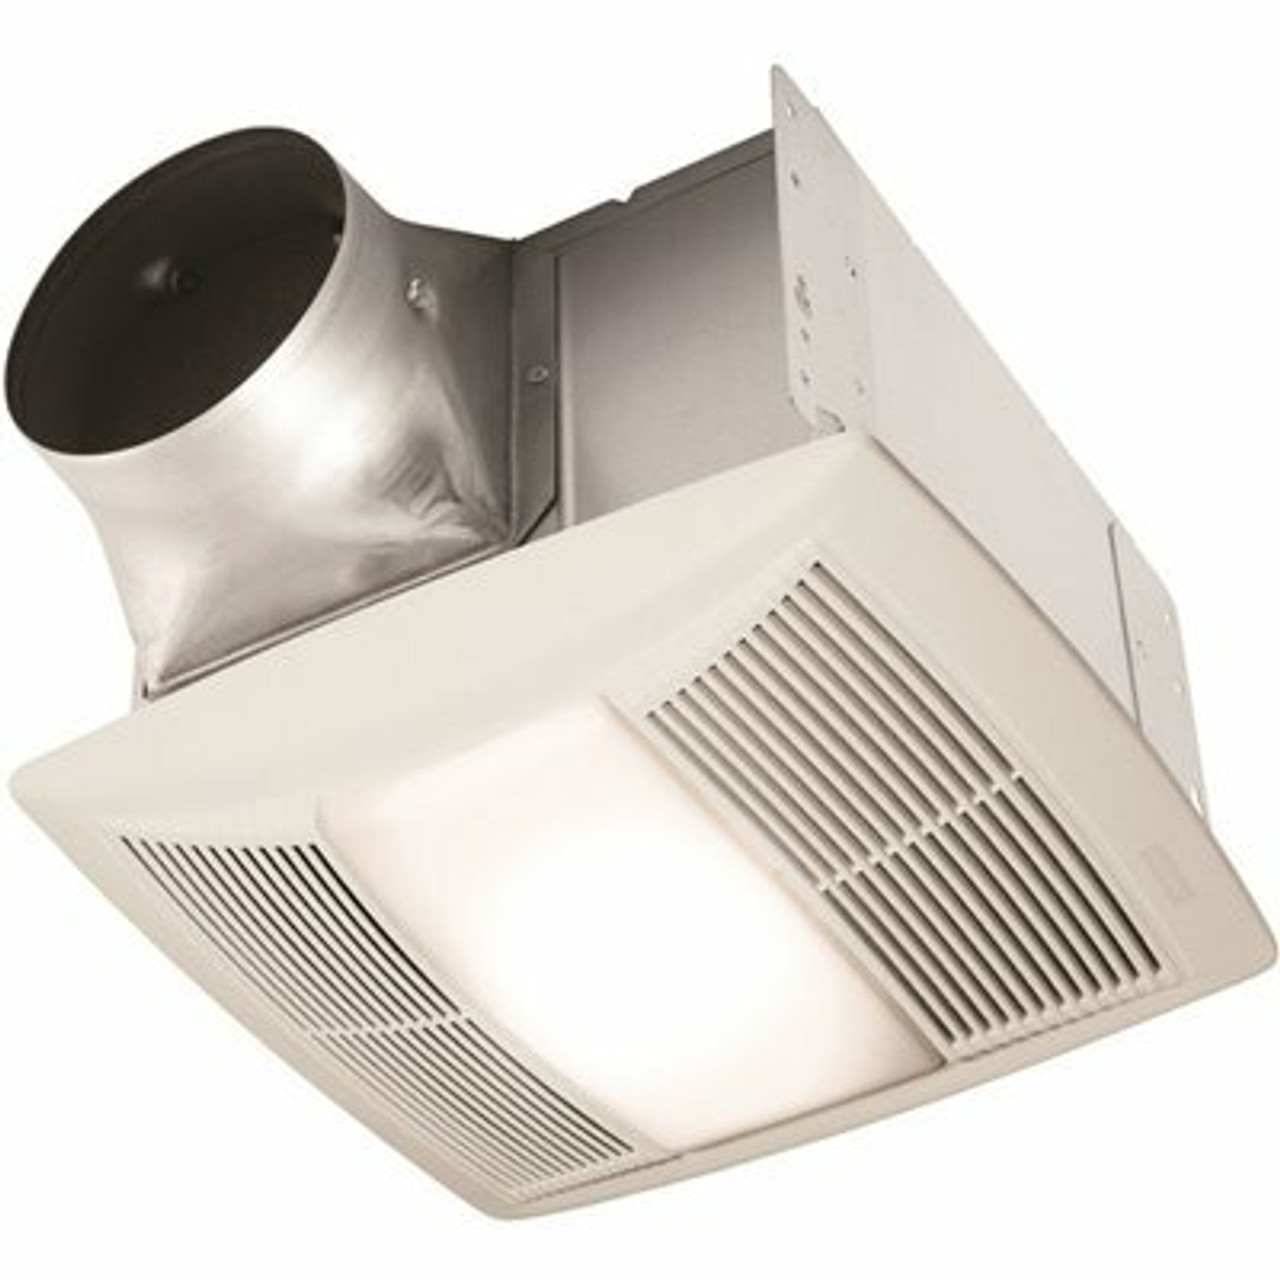 Broan-Nutone Qt Series 130 Cfm Ceiling Bathroom Exhaust Fan With Light And Night Light, Energy Star*